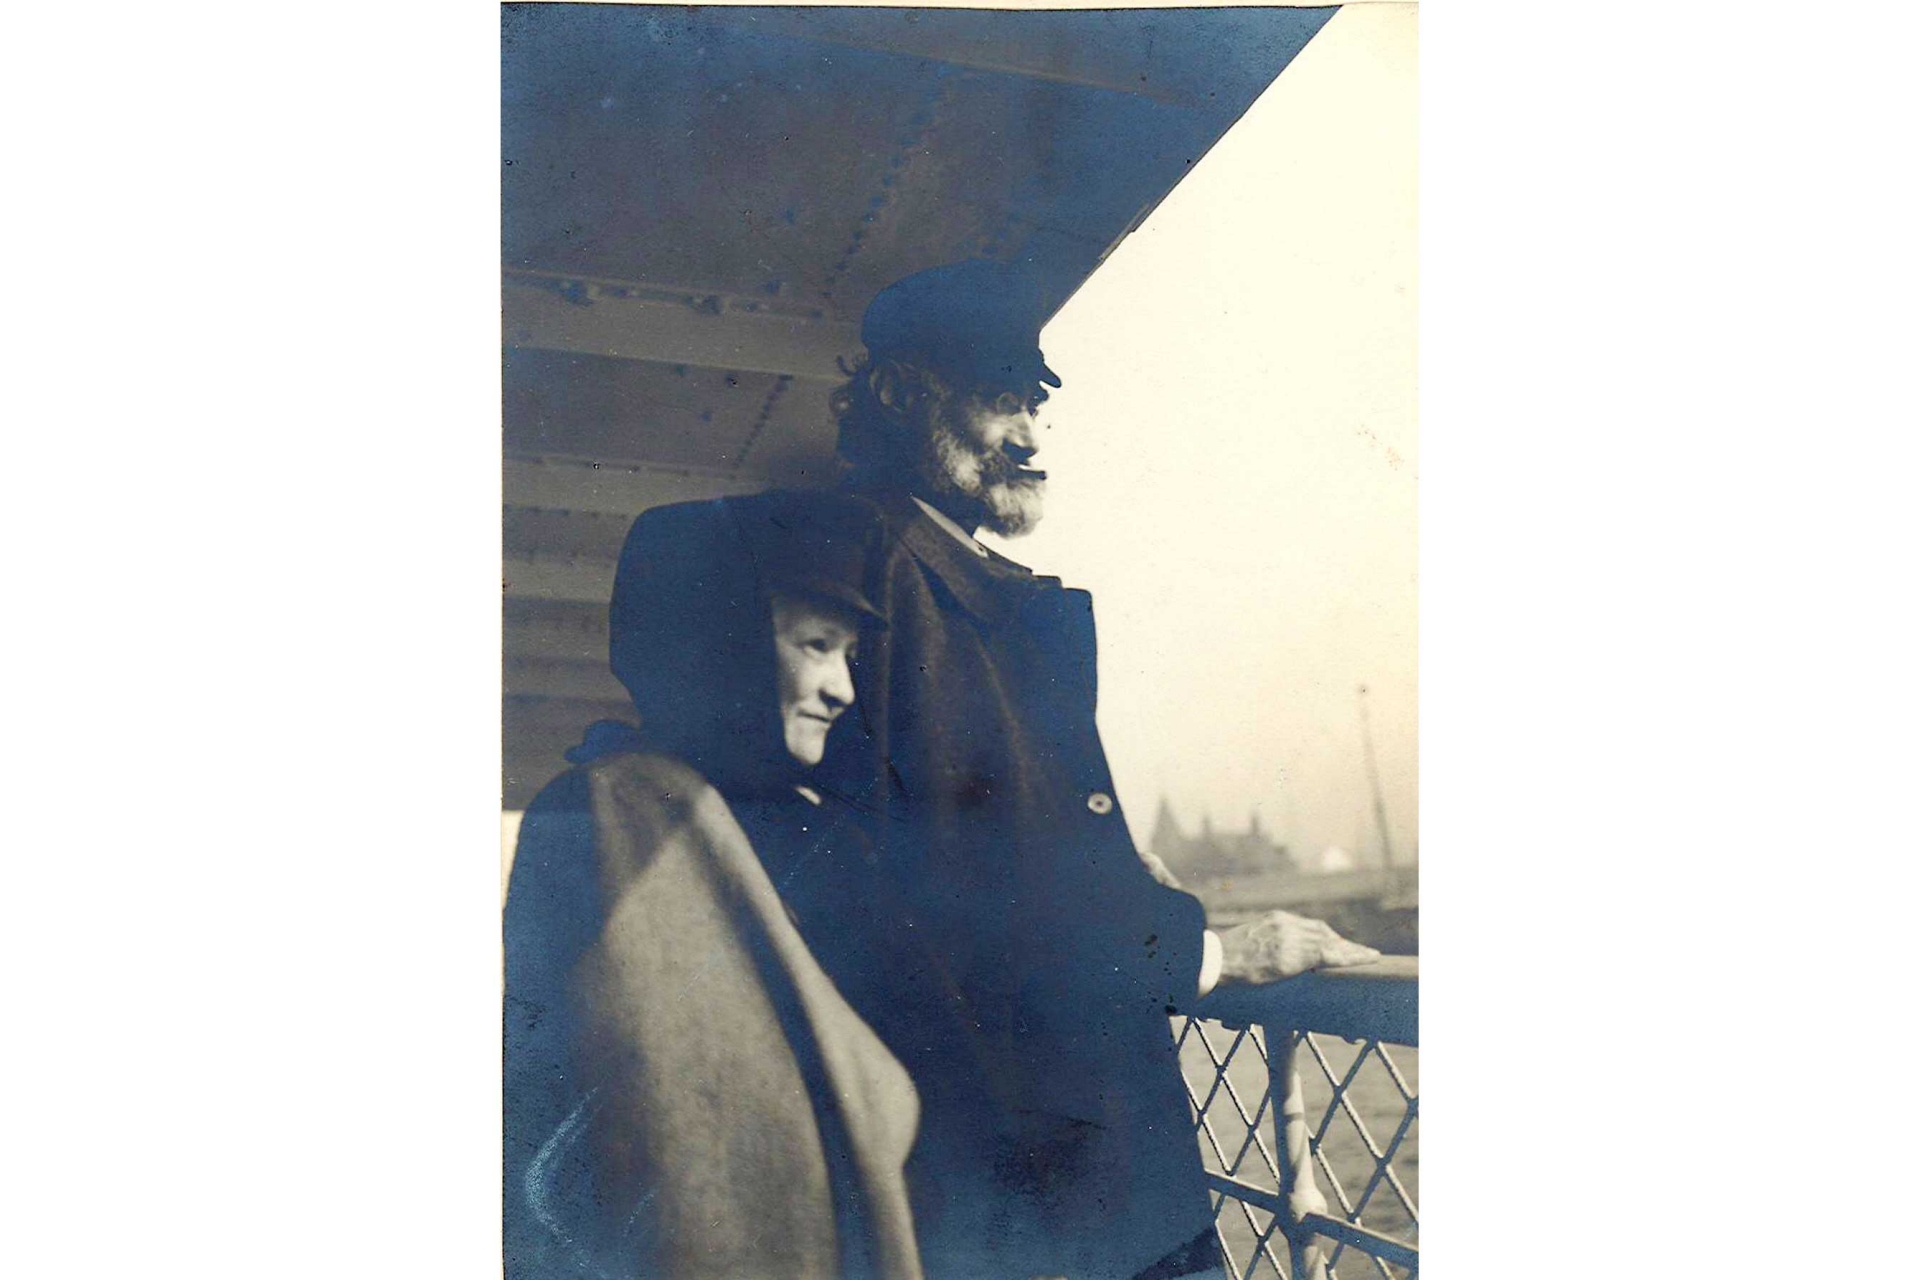 Prof. Ernst Abbe with his wife Else Abbe